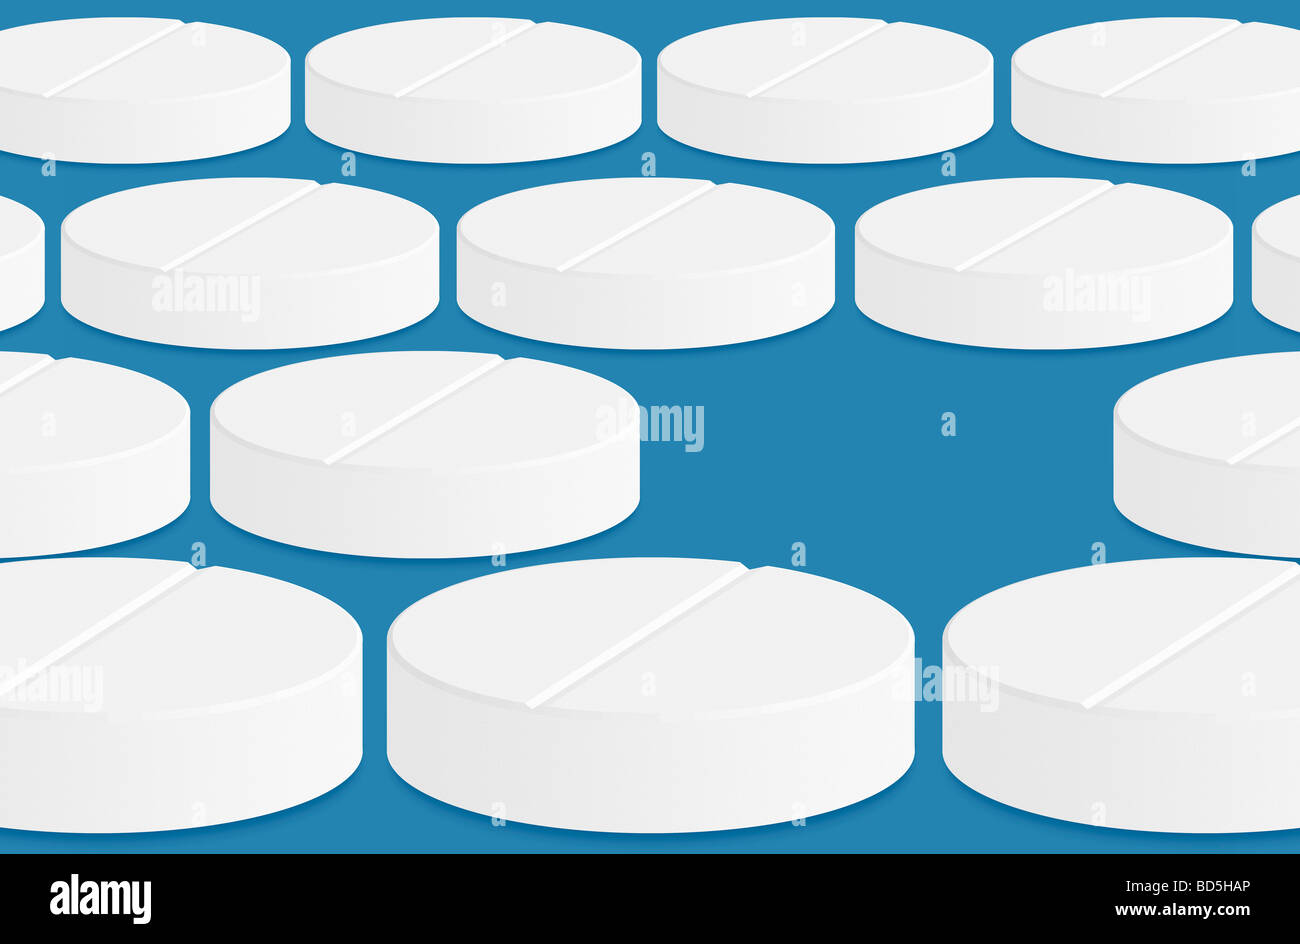 Illustration of rows of pills on a blue background with one pill missing Stock Photo